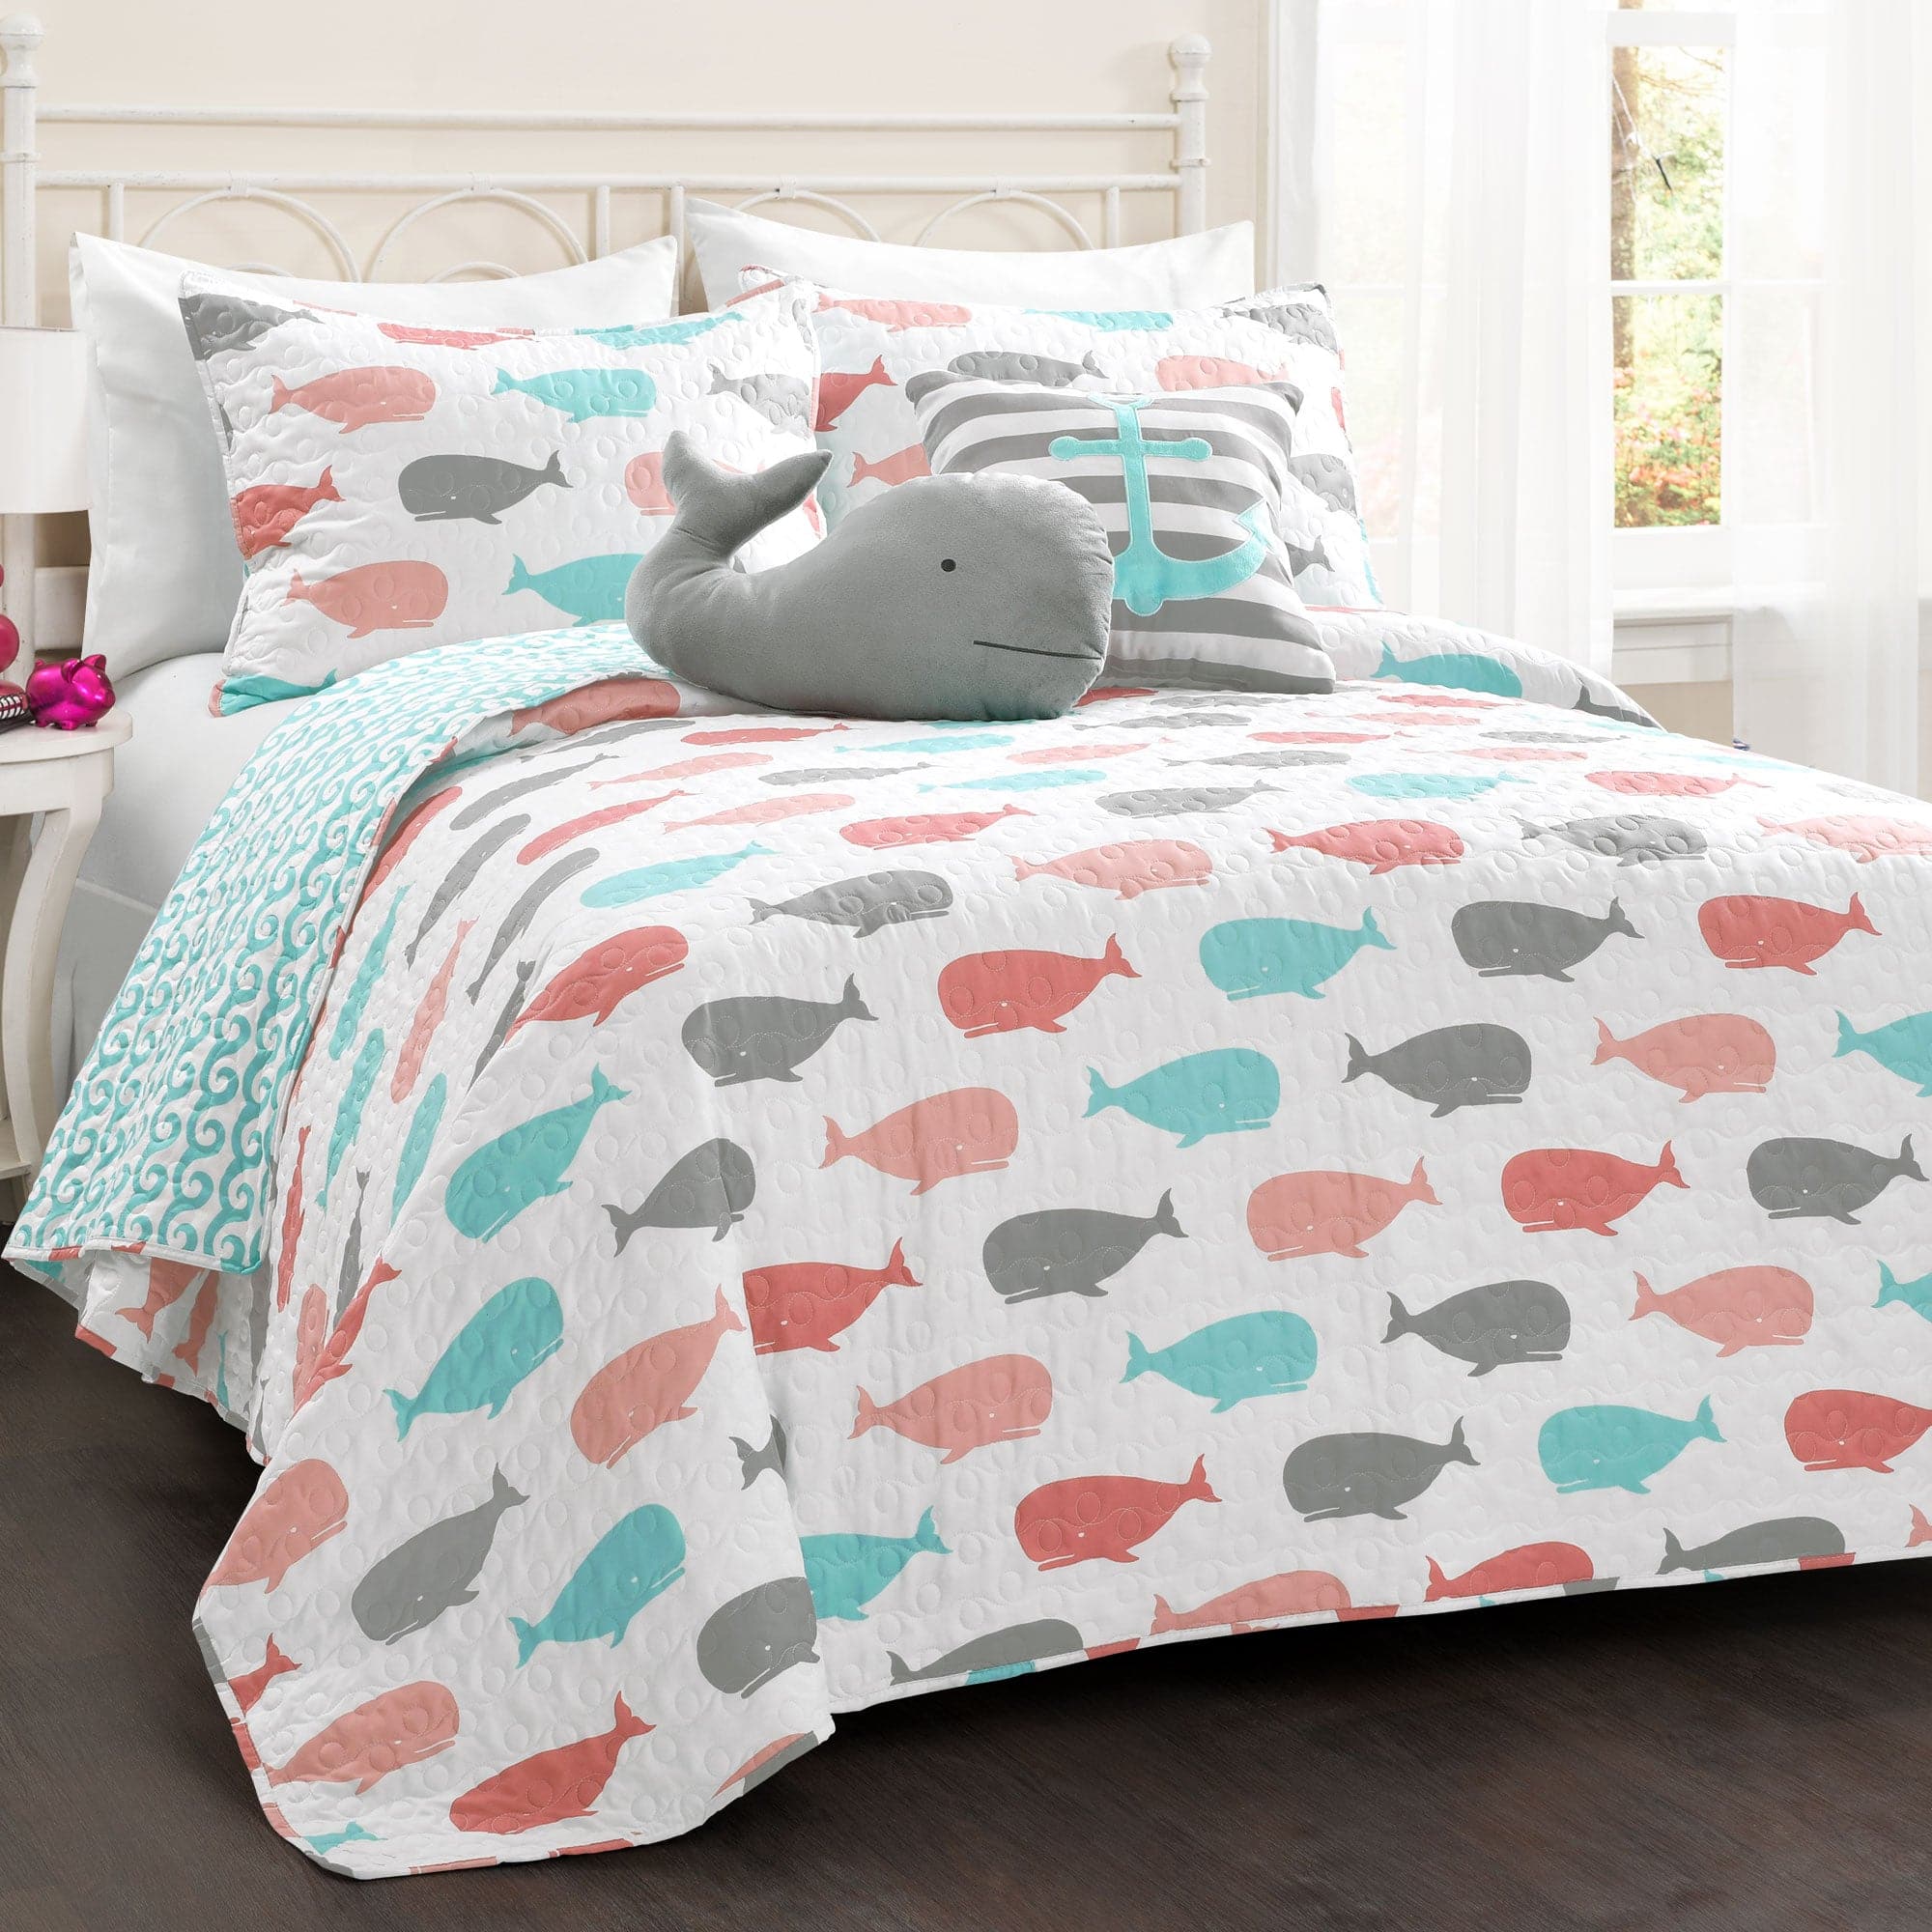 queen size bed quilts on sale